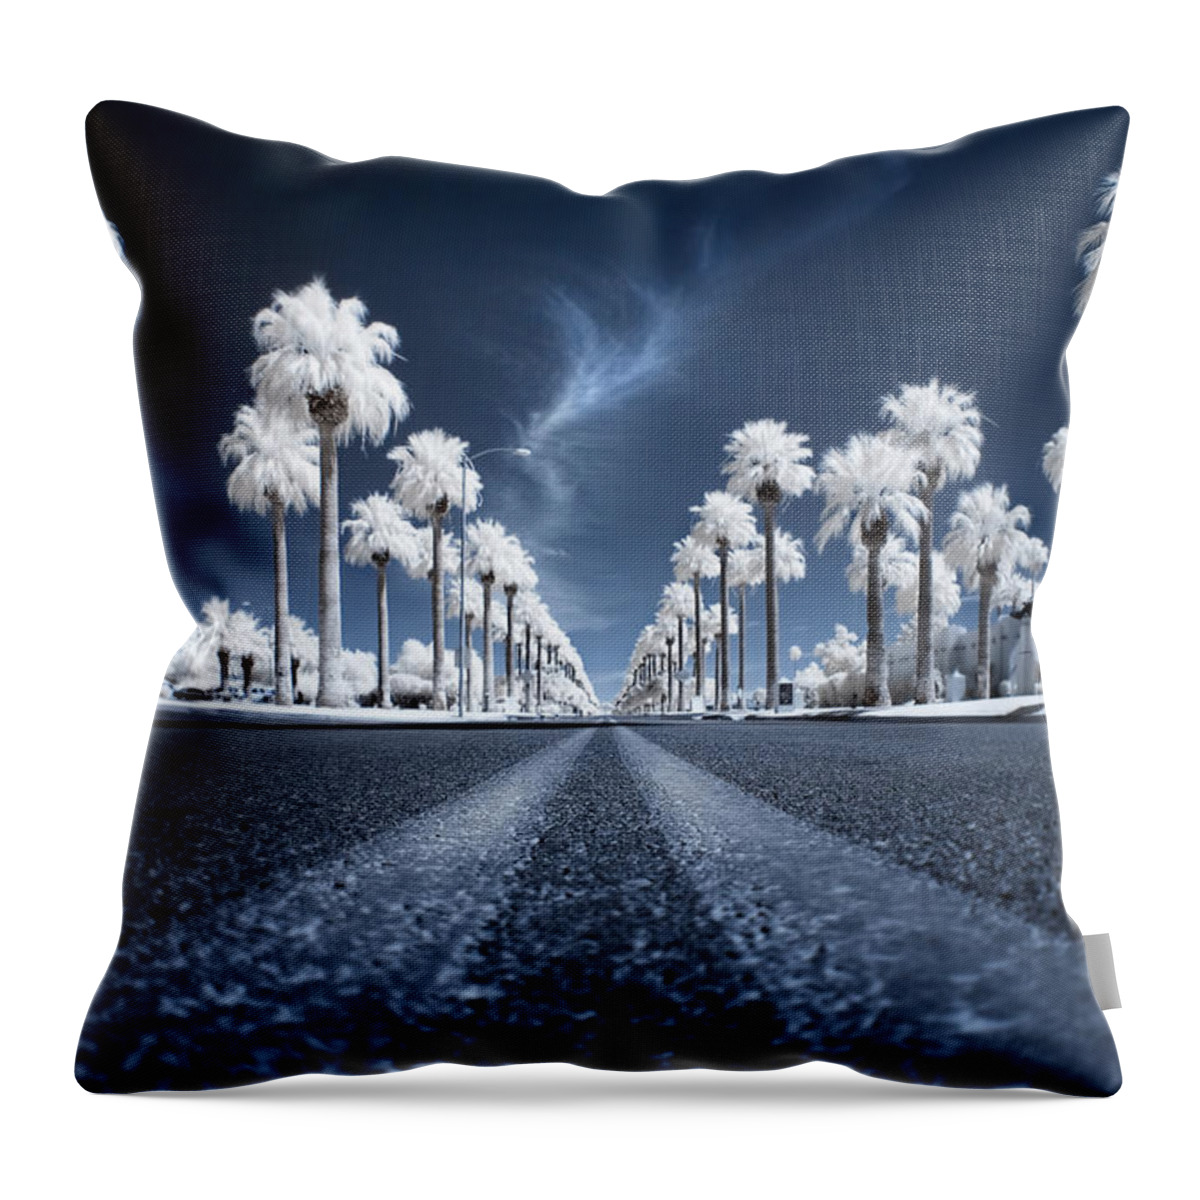 Infrared Throw Pillow featuring the photograph X by Sean Foster